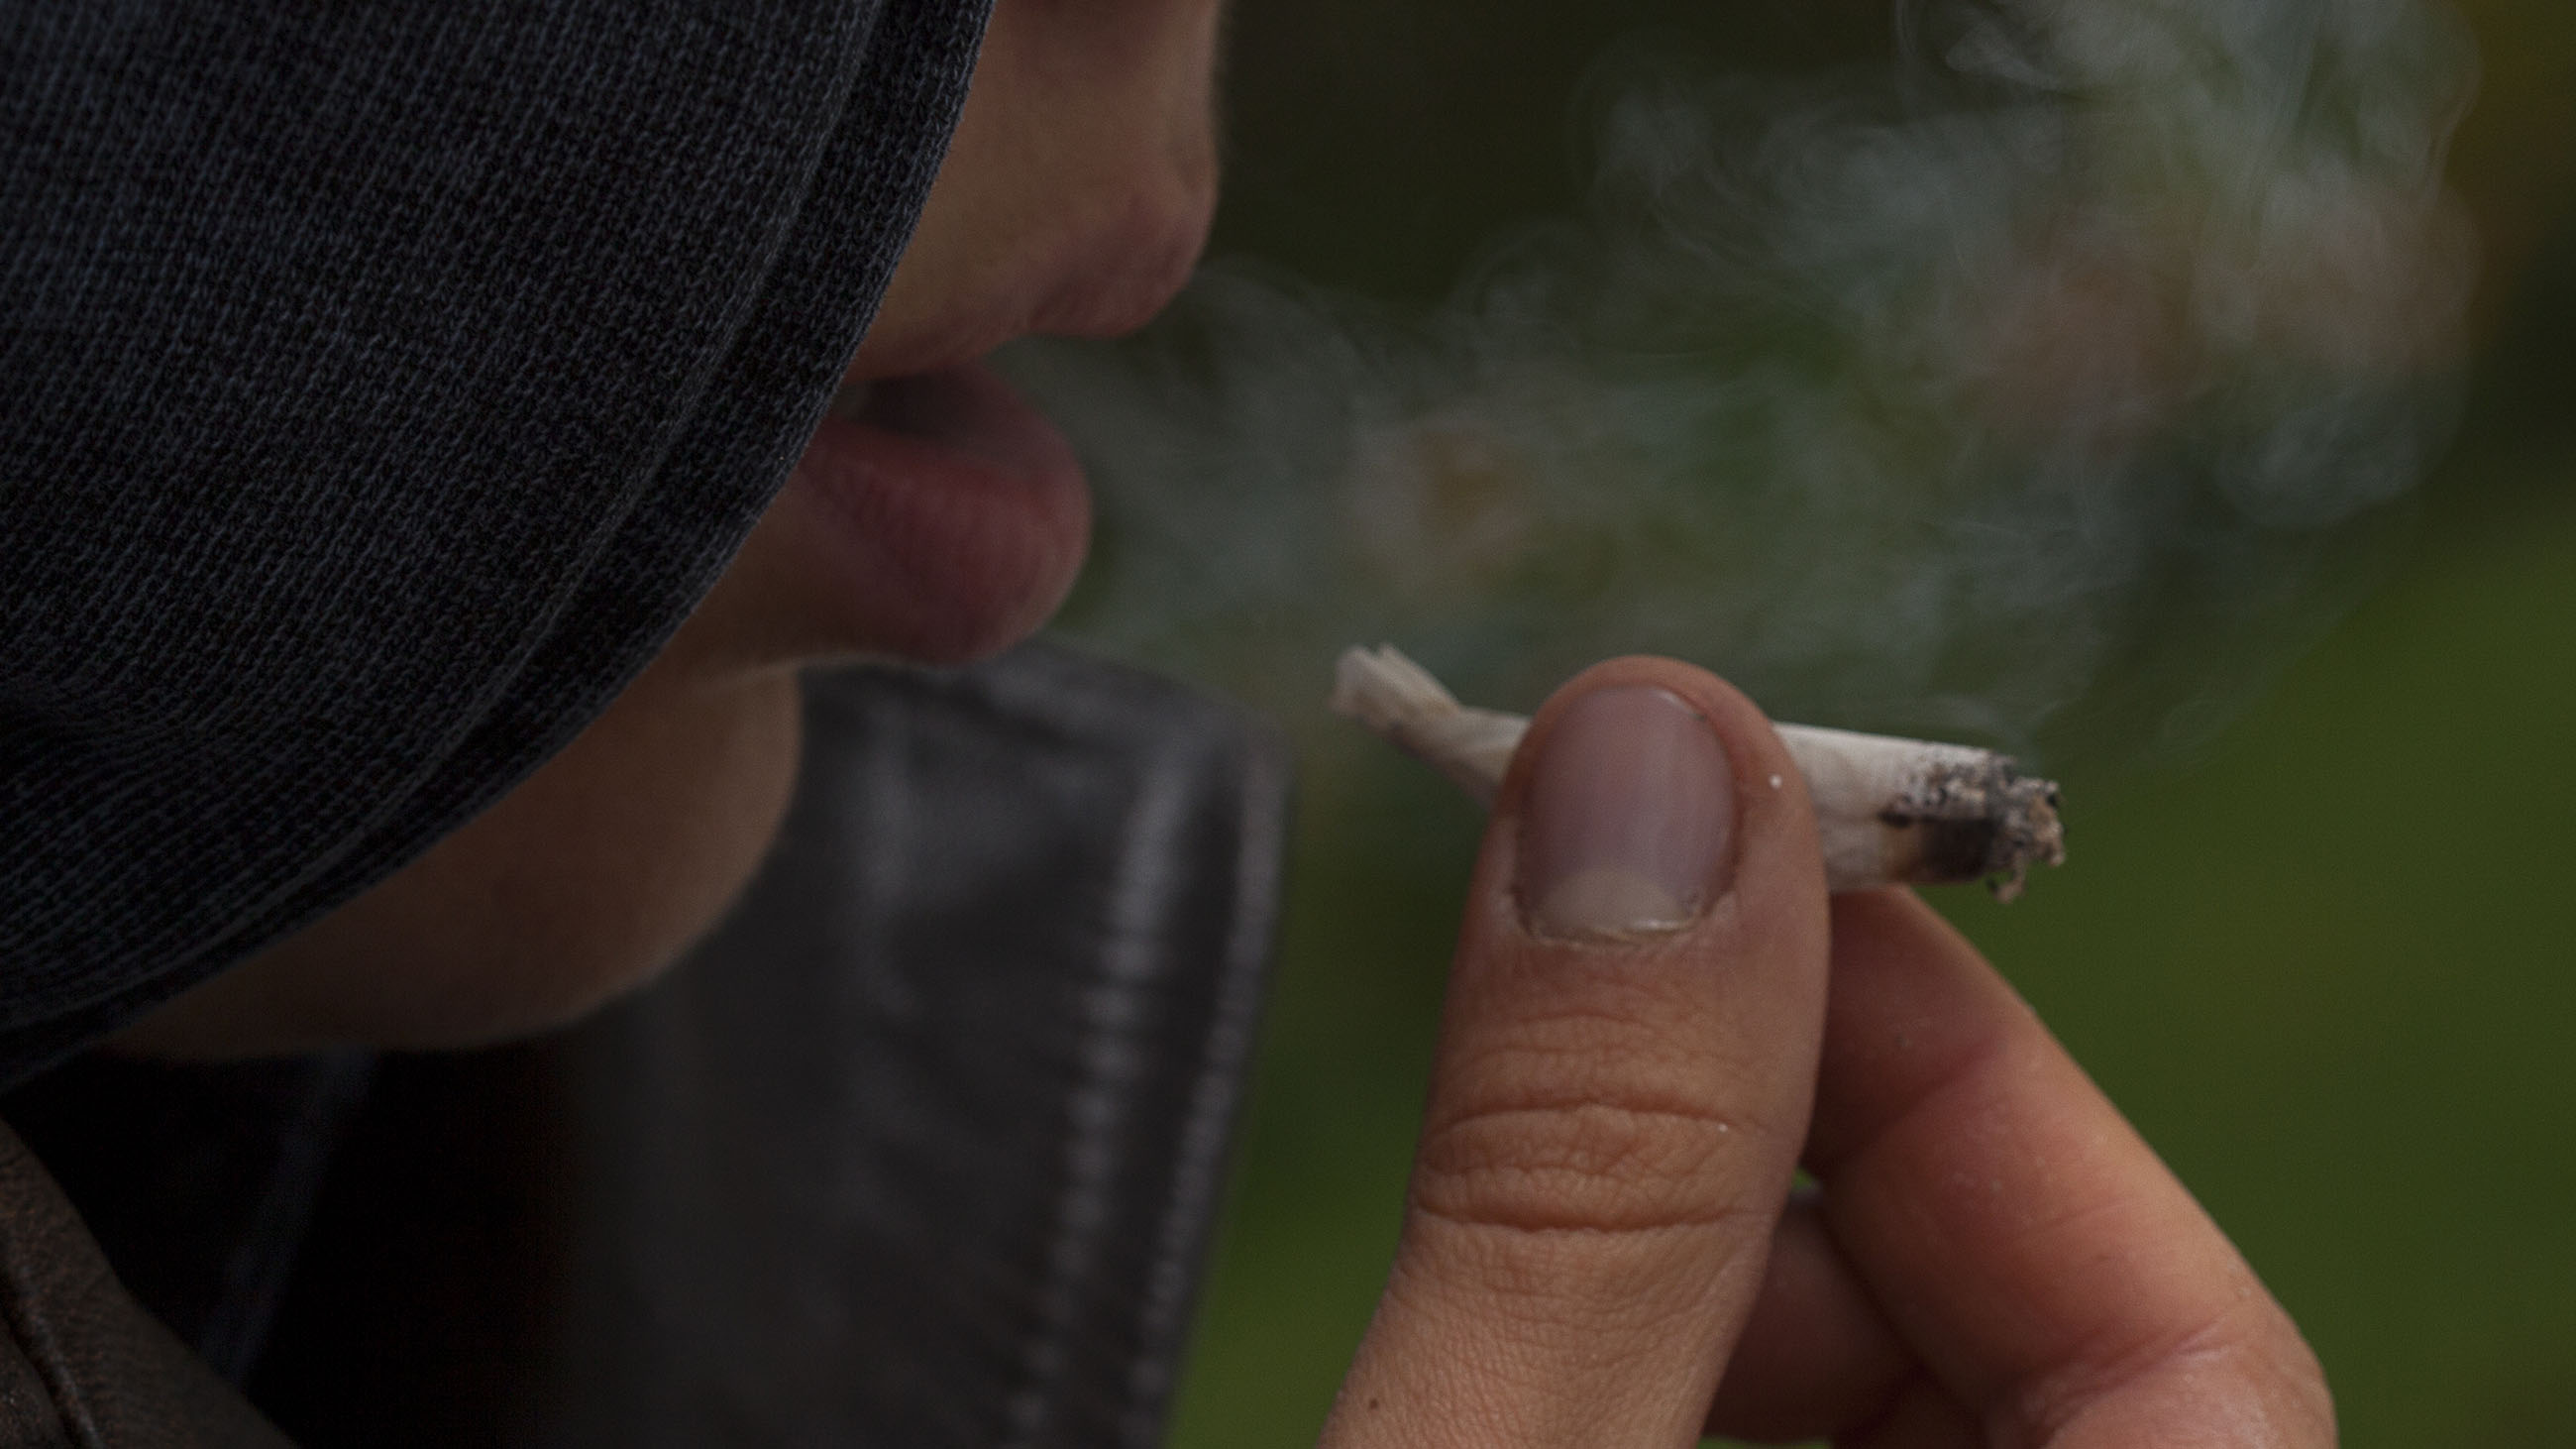 Teen Use Of Nearly All Illicit Drugs Declined Again This Year